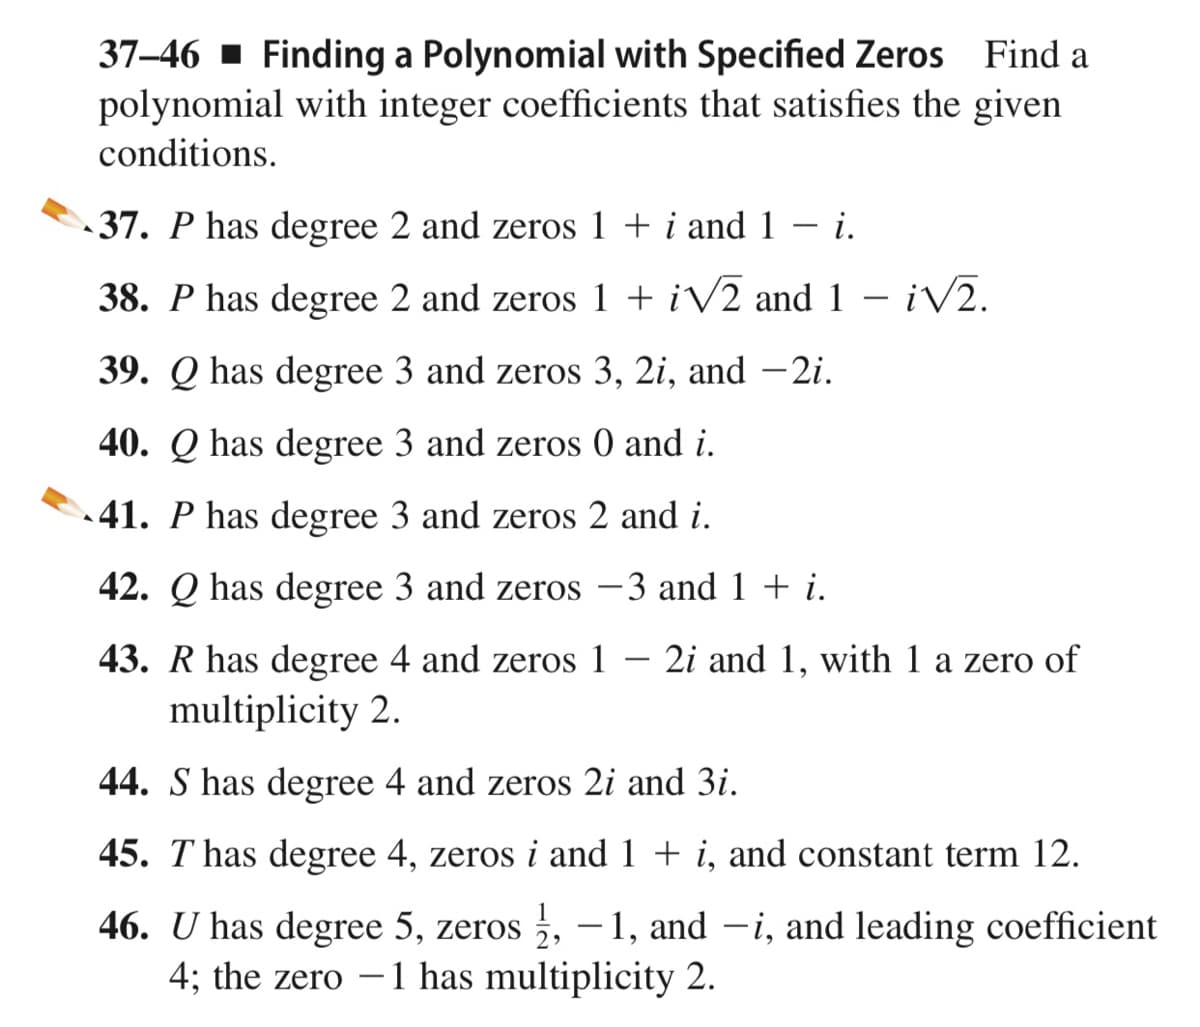 37–46 1 Finding a Polynomial with Specified Zeros Find a
polynomial with integer coefficients that satisfies the given
conditions.
37. P has degree 2 and zeros 1 + i and 1
i.
38. P has degree 2 and zeros 1 + iV2 and 1 – iV2.
39. Q has degree 3 and zeros 3, 2i, and -2i.
40. Q has degree 3 and zeros 0 and i.
41. P has degree 3 and zeros 2 and i.
42. Q has degree 3 and zeros –3 and 1 + i.
43. R has degree 4 and zeros 1
2i and 1, with 1 a zero of
multiplicity 2.
44. S has degree 4 and zeros 2i and 3i.
45. T has degree 4, zeros i and 1 + i, and constant term 12.
46. U has degree 5, zeros , – 1, and –i, and leading coefficient
4; the zero – 1 has multiplicity 2.
